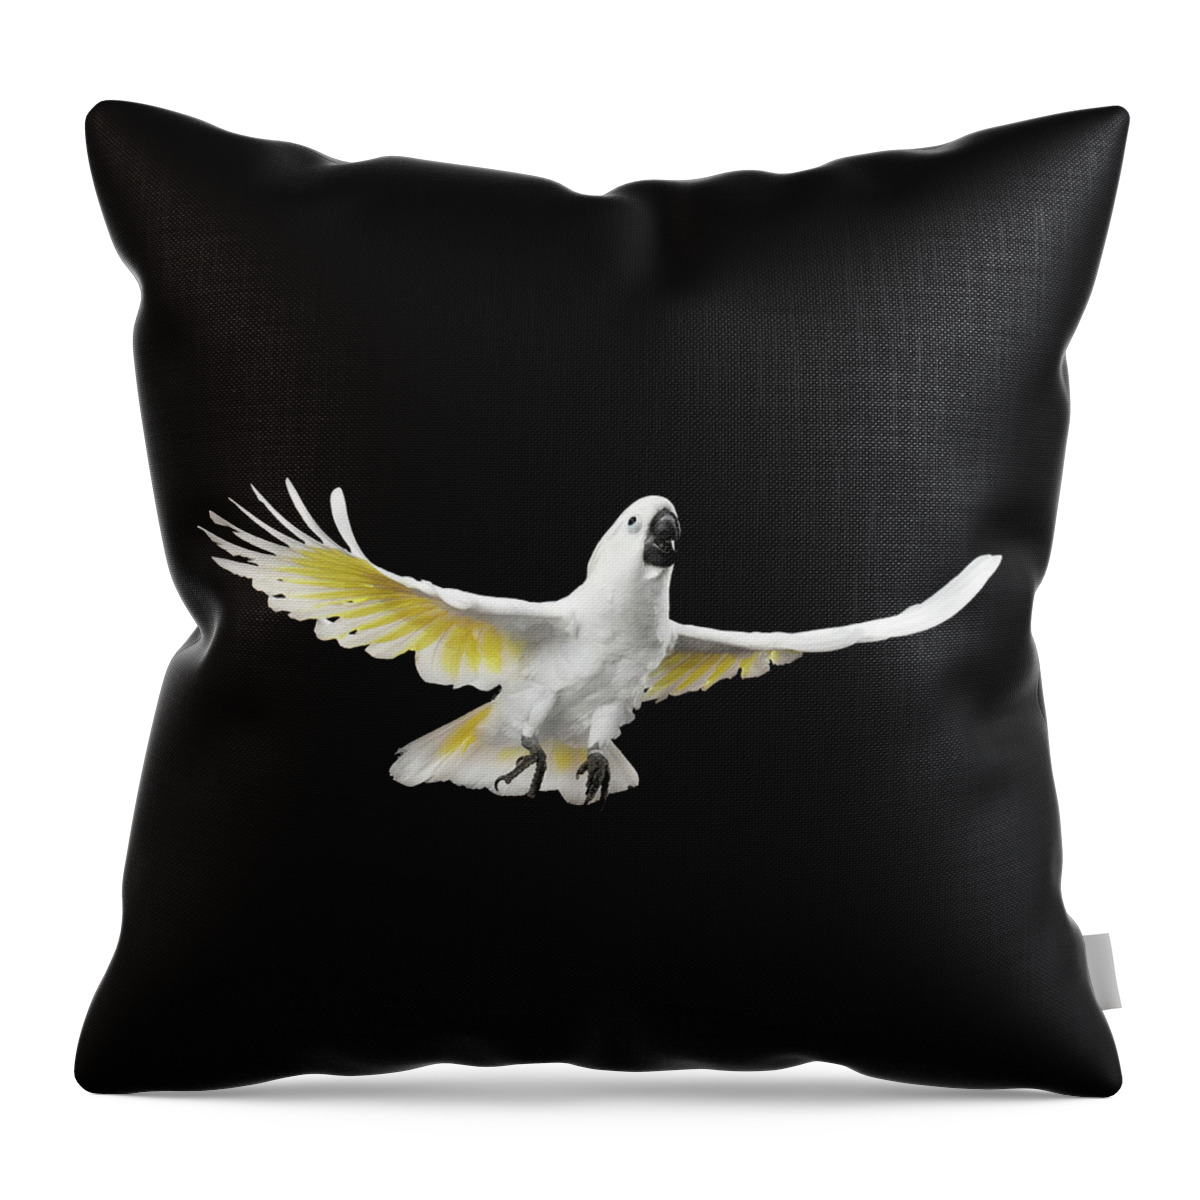 Cockatoo Throw Pillow featuring the photograph Flying Crested Cockatoo alba, Umbrella, Indonesia, isolated on Black Background by Sergey Taran